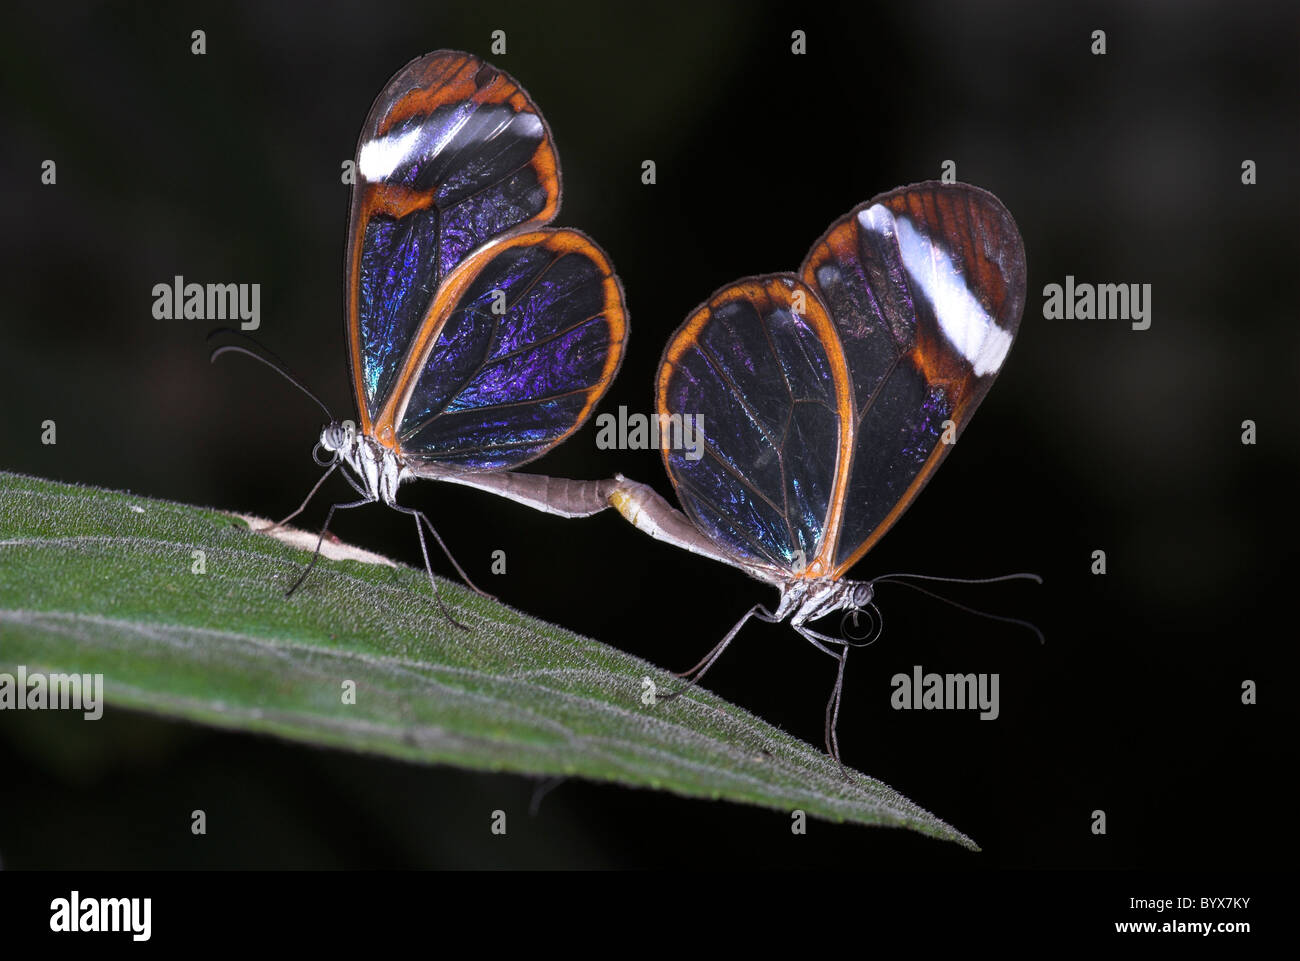 Greta Oto Clearwing Glasswing Butterfly Central America Stock Photo